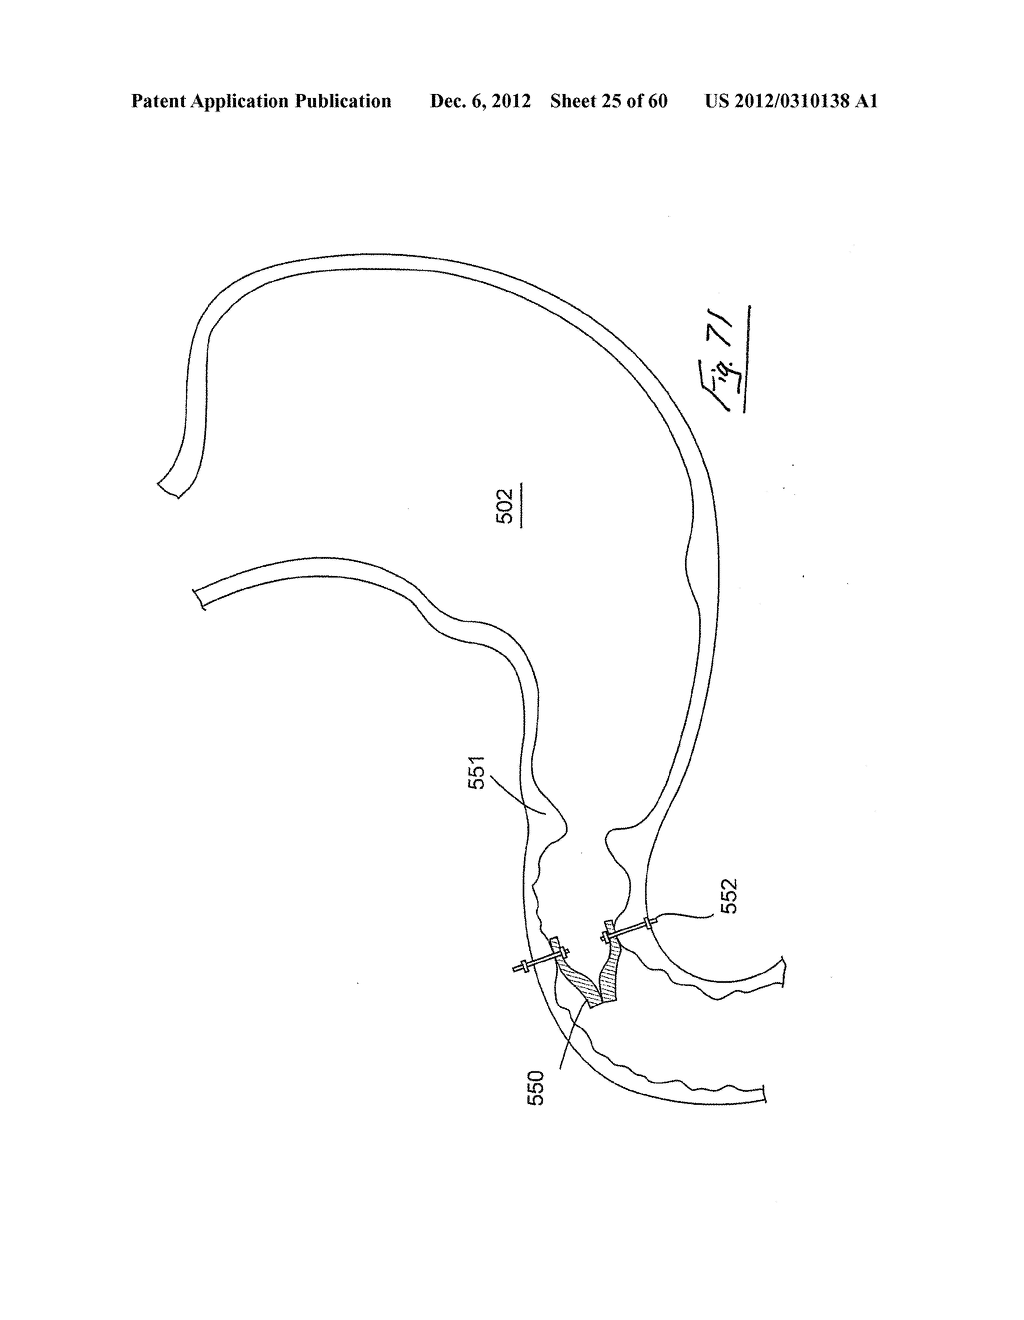 GASTROINTESTINAL IMPLANT DEVICE AND DELIVERY SYSTEM THEREFOR - diagram, schematic, and image 26